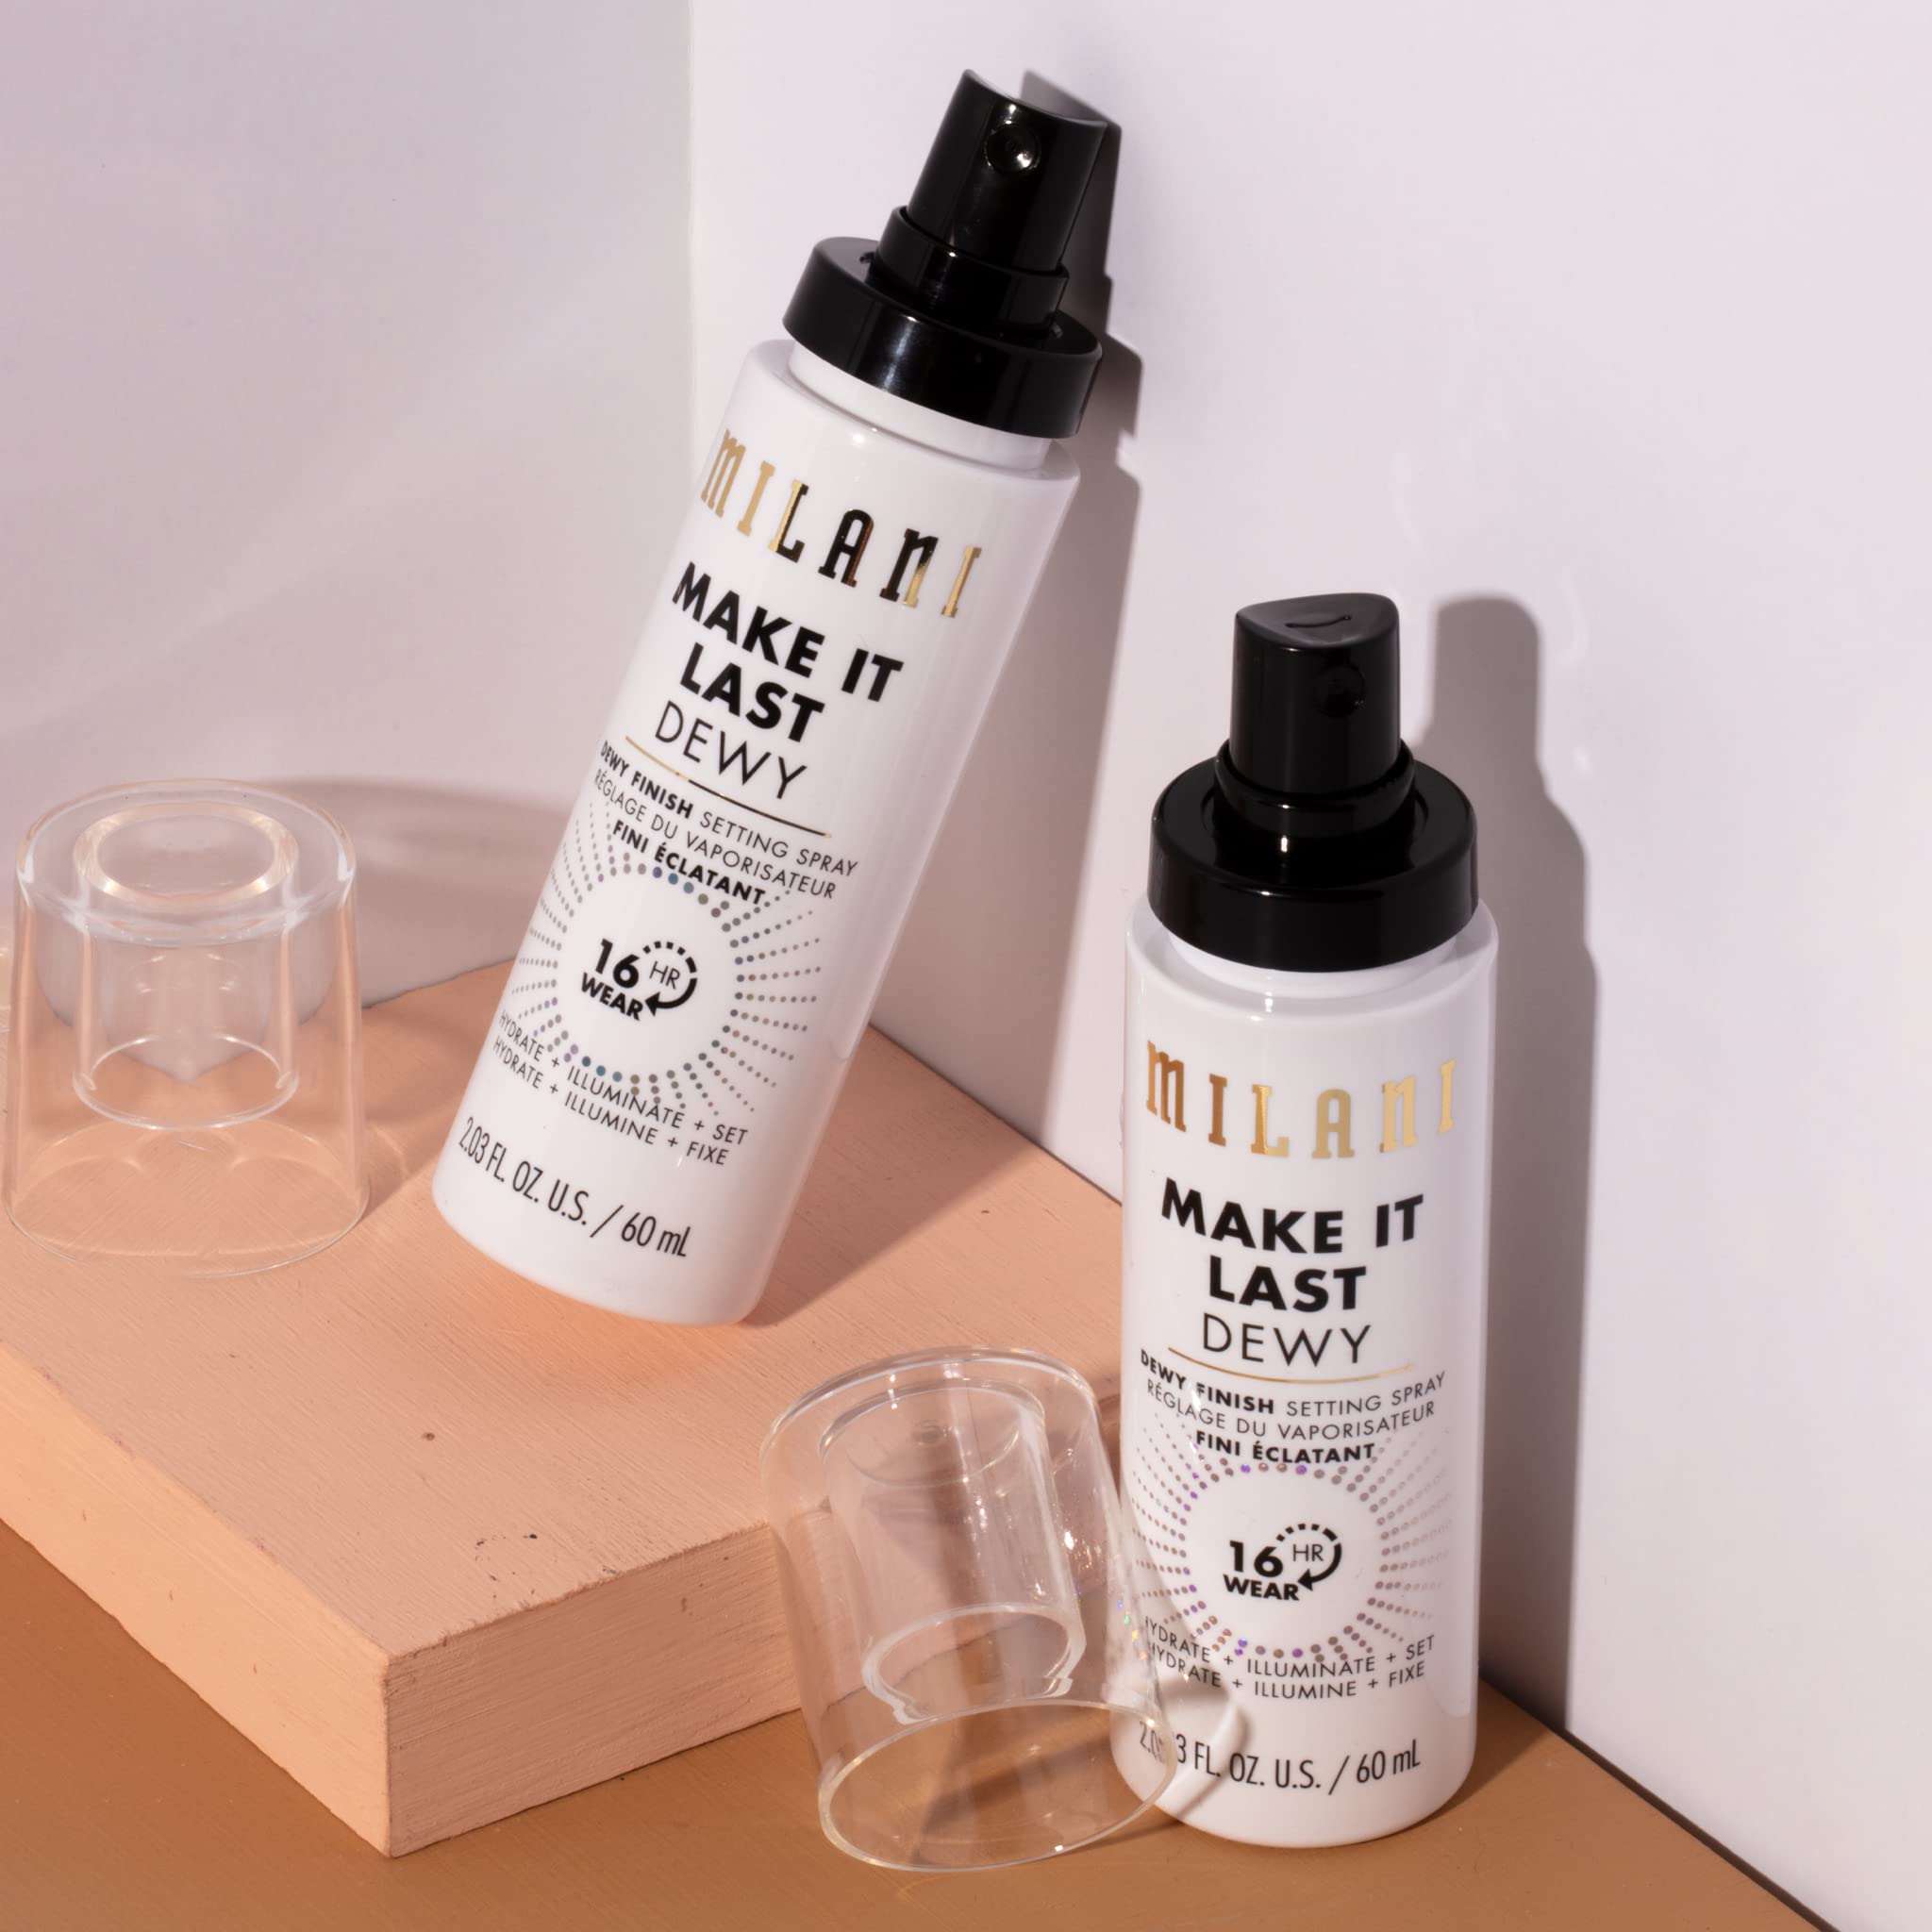 Milani Make It Dewy 3-In-1 Setting Spray - Hydrate + Illuminate + Set (2.03 Fl. Oz.) Cruelty-Free Makeup Setting Spray - Prime & Hydrate Skin for a Bright, Refreshing Look